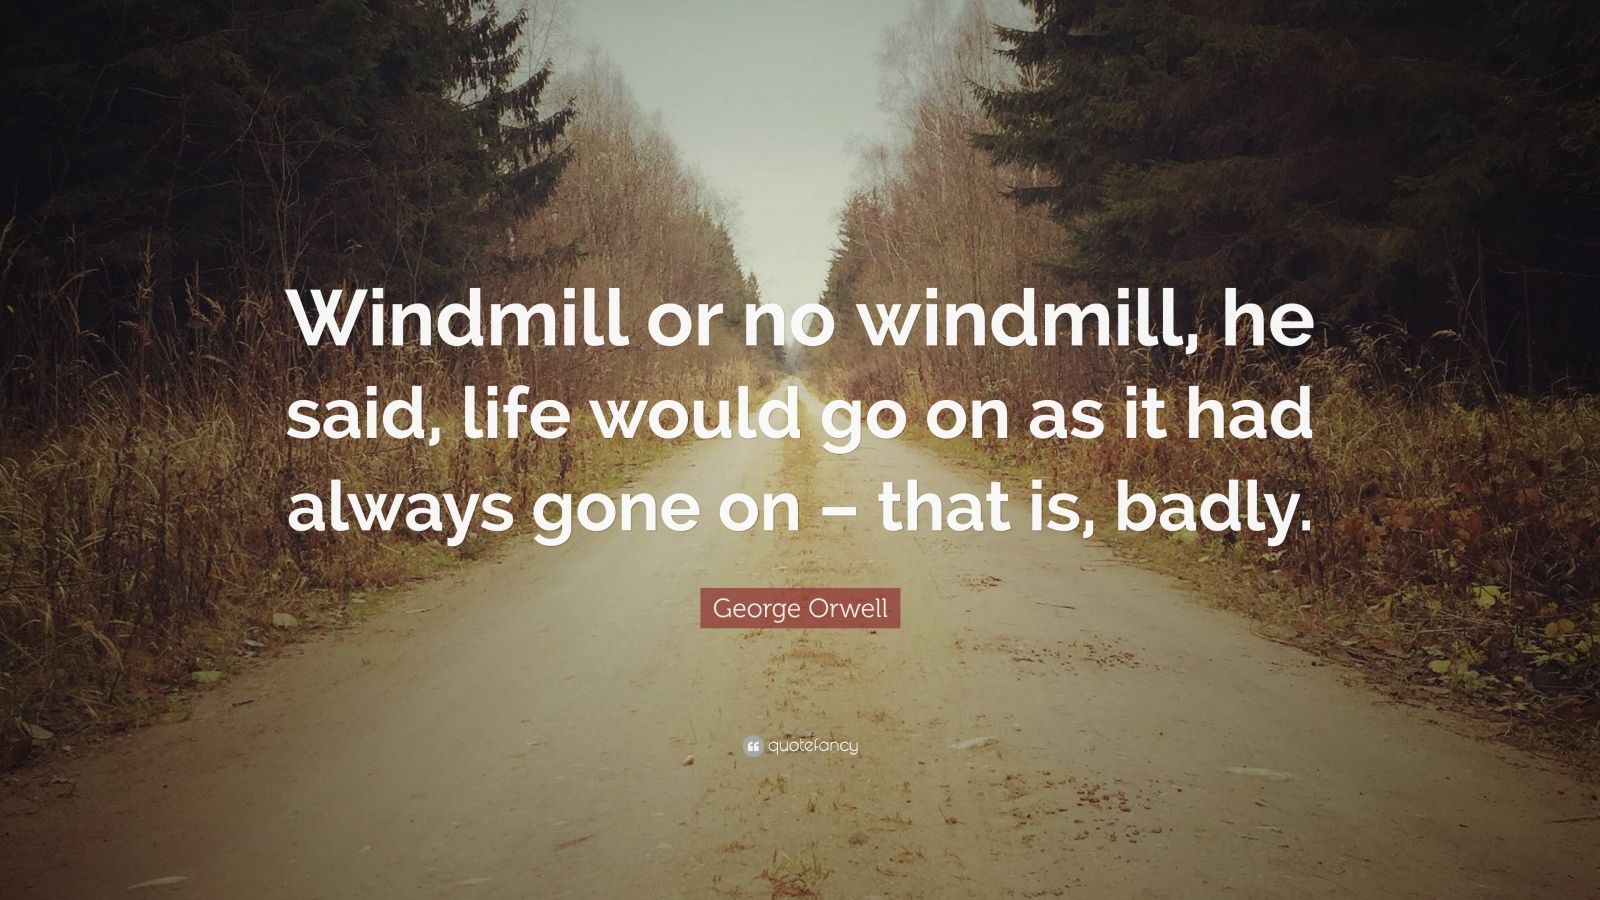 George Orwell Quote: “Windmill or no windmill, he said, life would go